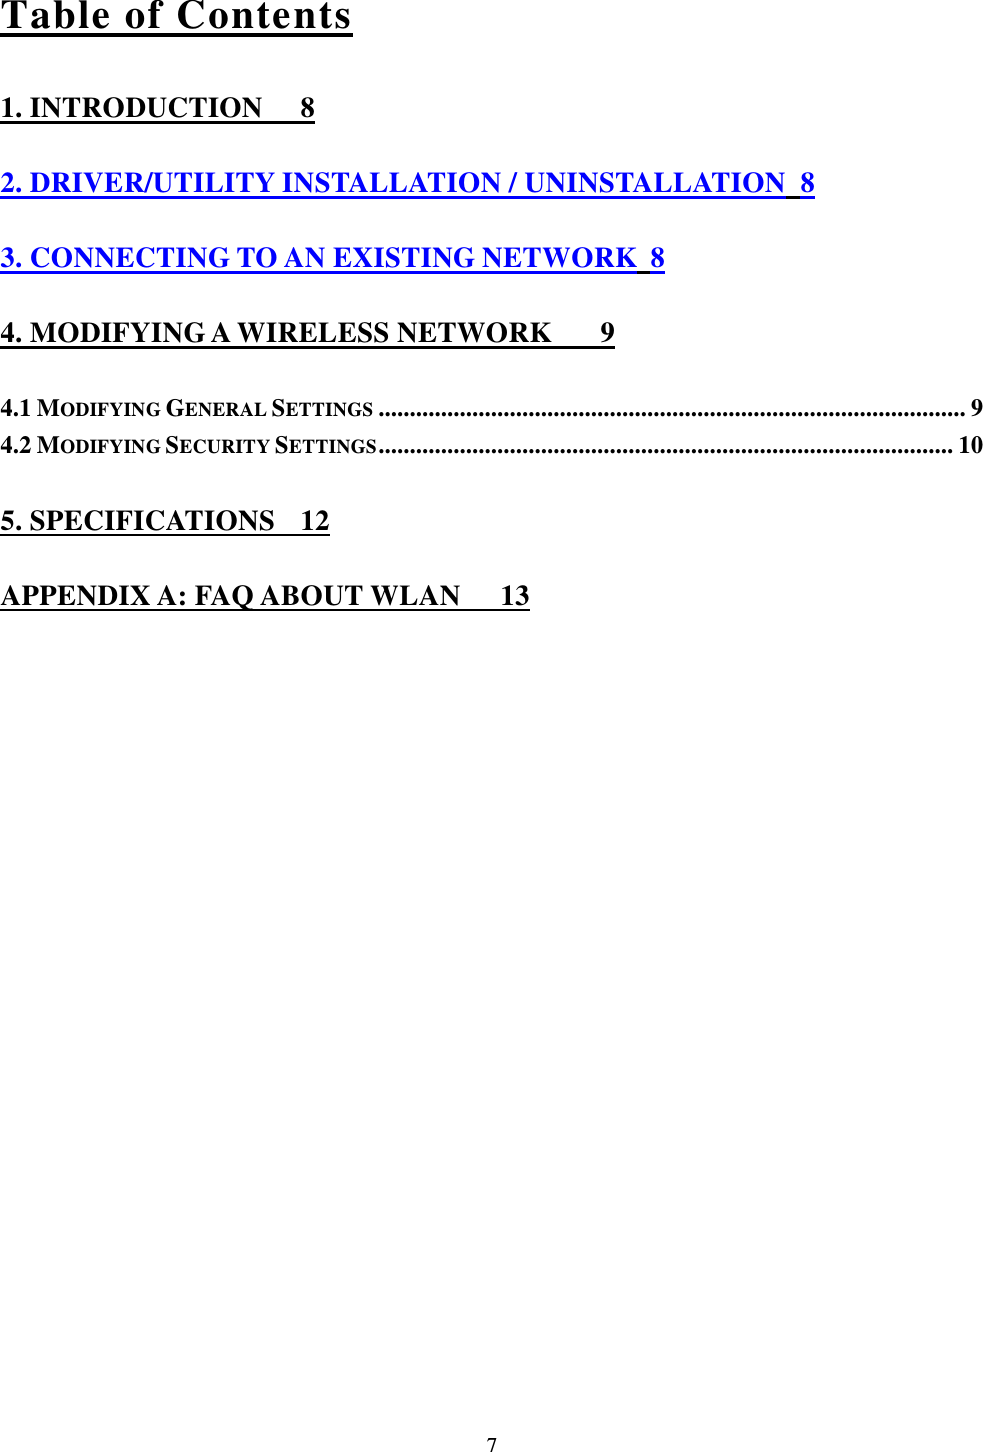  7 Table of Contents 1. INTRODUCTION  8 2. DRIVER/UTILITY INSTALLATION / UNINSTALLATION 8 3. CONNECTING TO AN EXISTING NETWORK 8 4. MODIFYING A WIRELESS NETWORK  9 4.1 MODIFYING GENERAL SETTINGS .............................................................................................. 9 4.2 MODIFYING SECURITY SETTINGS ............................................................................................ 10 5. SPECIFICATIONS  12 APPENDIX A: FAQ ABOUT WLAN  13 